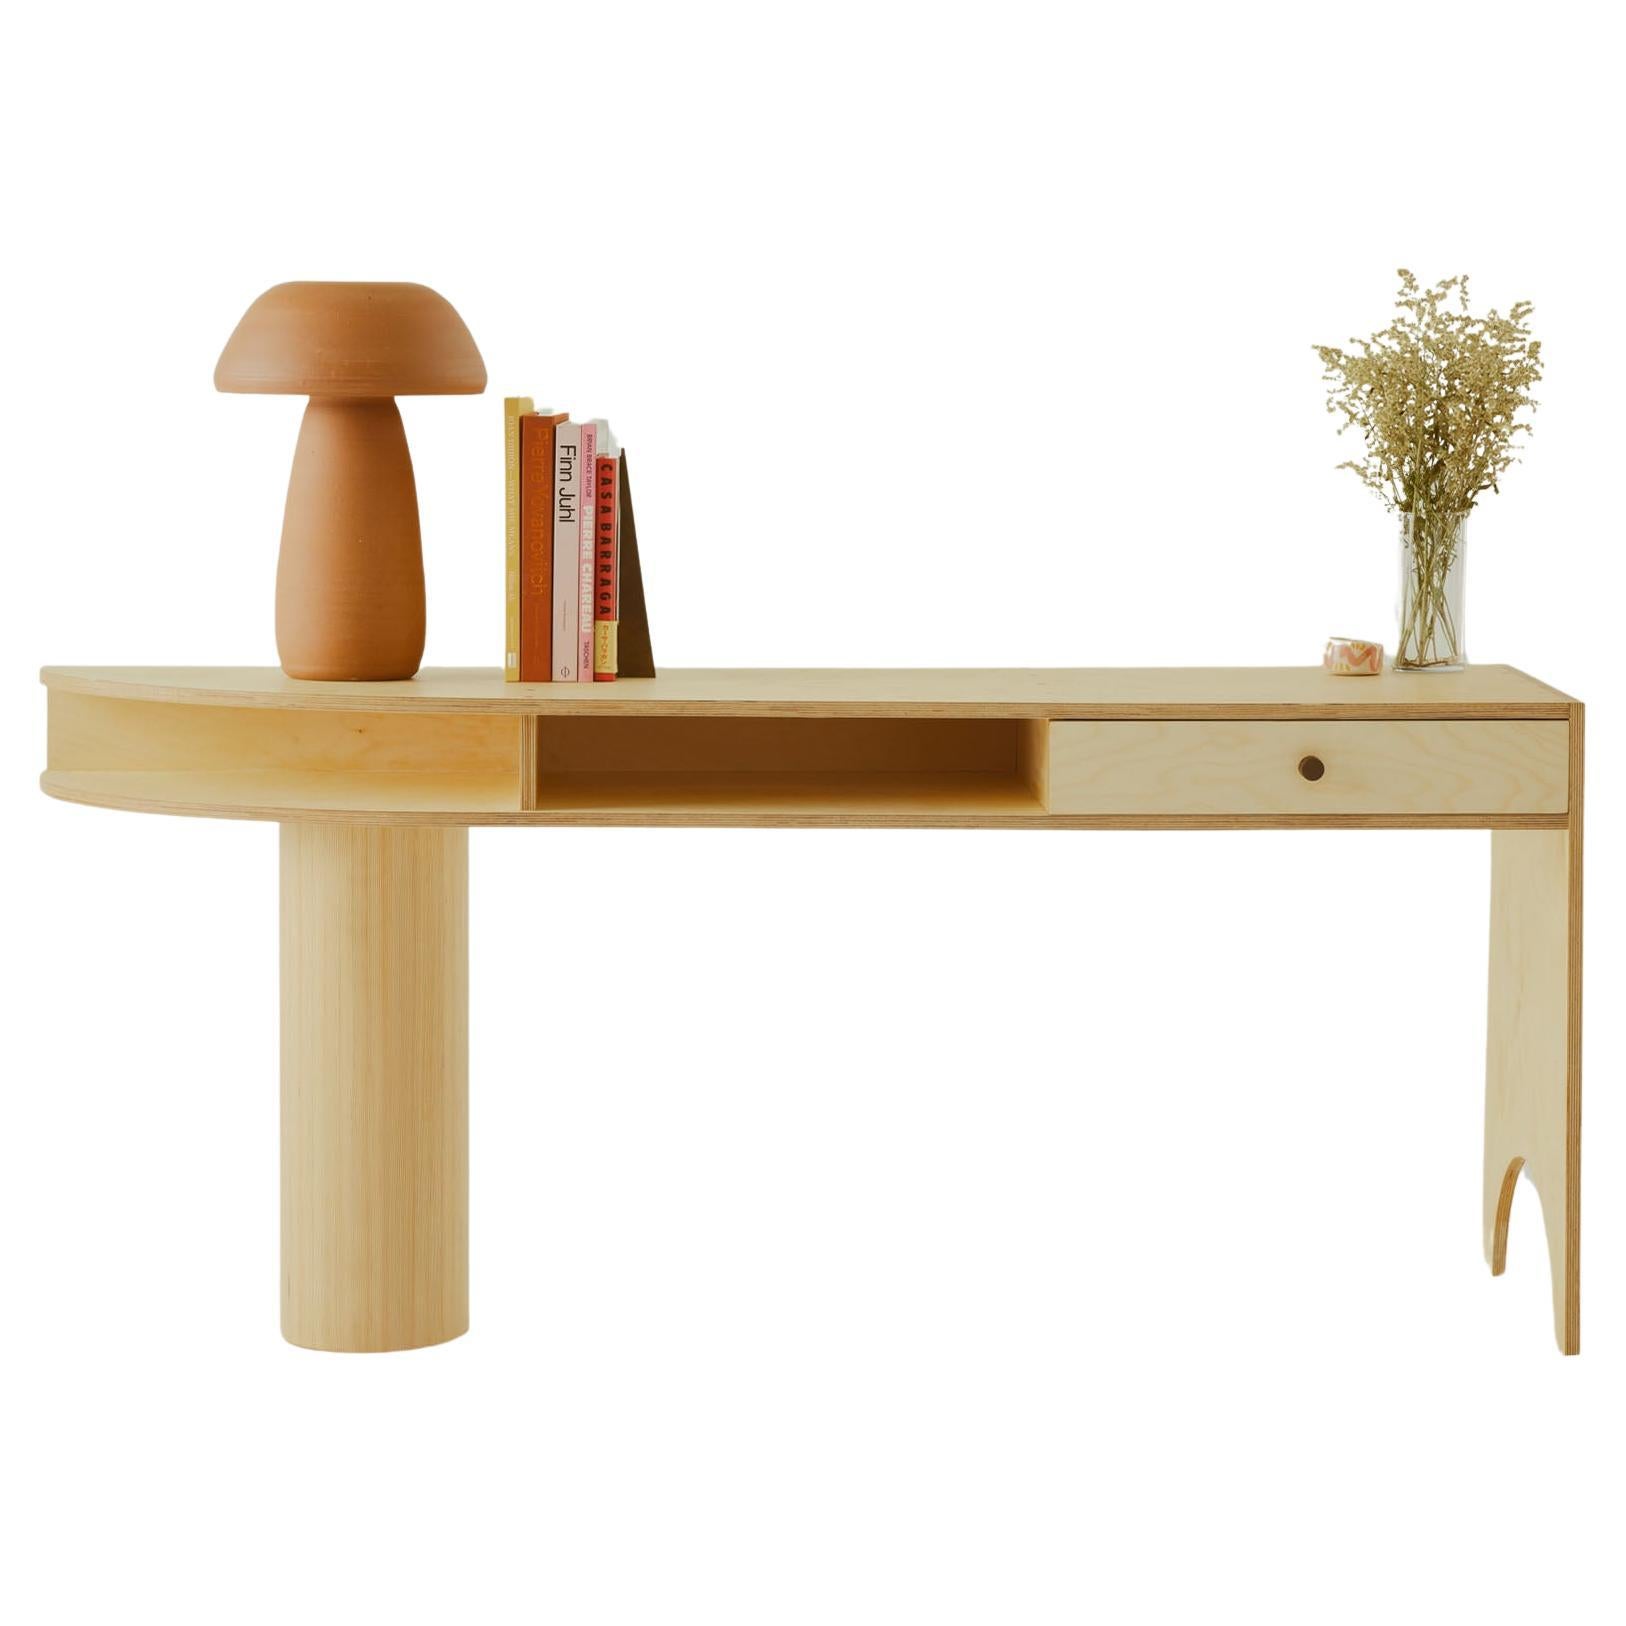 Wild Willy's Woodshop Contemporary Curved Birch Pillar Desk For Sale